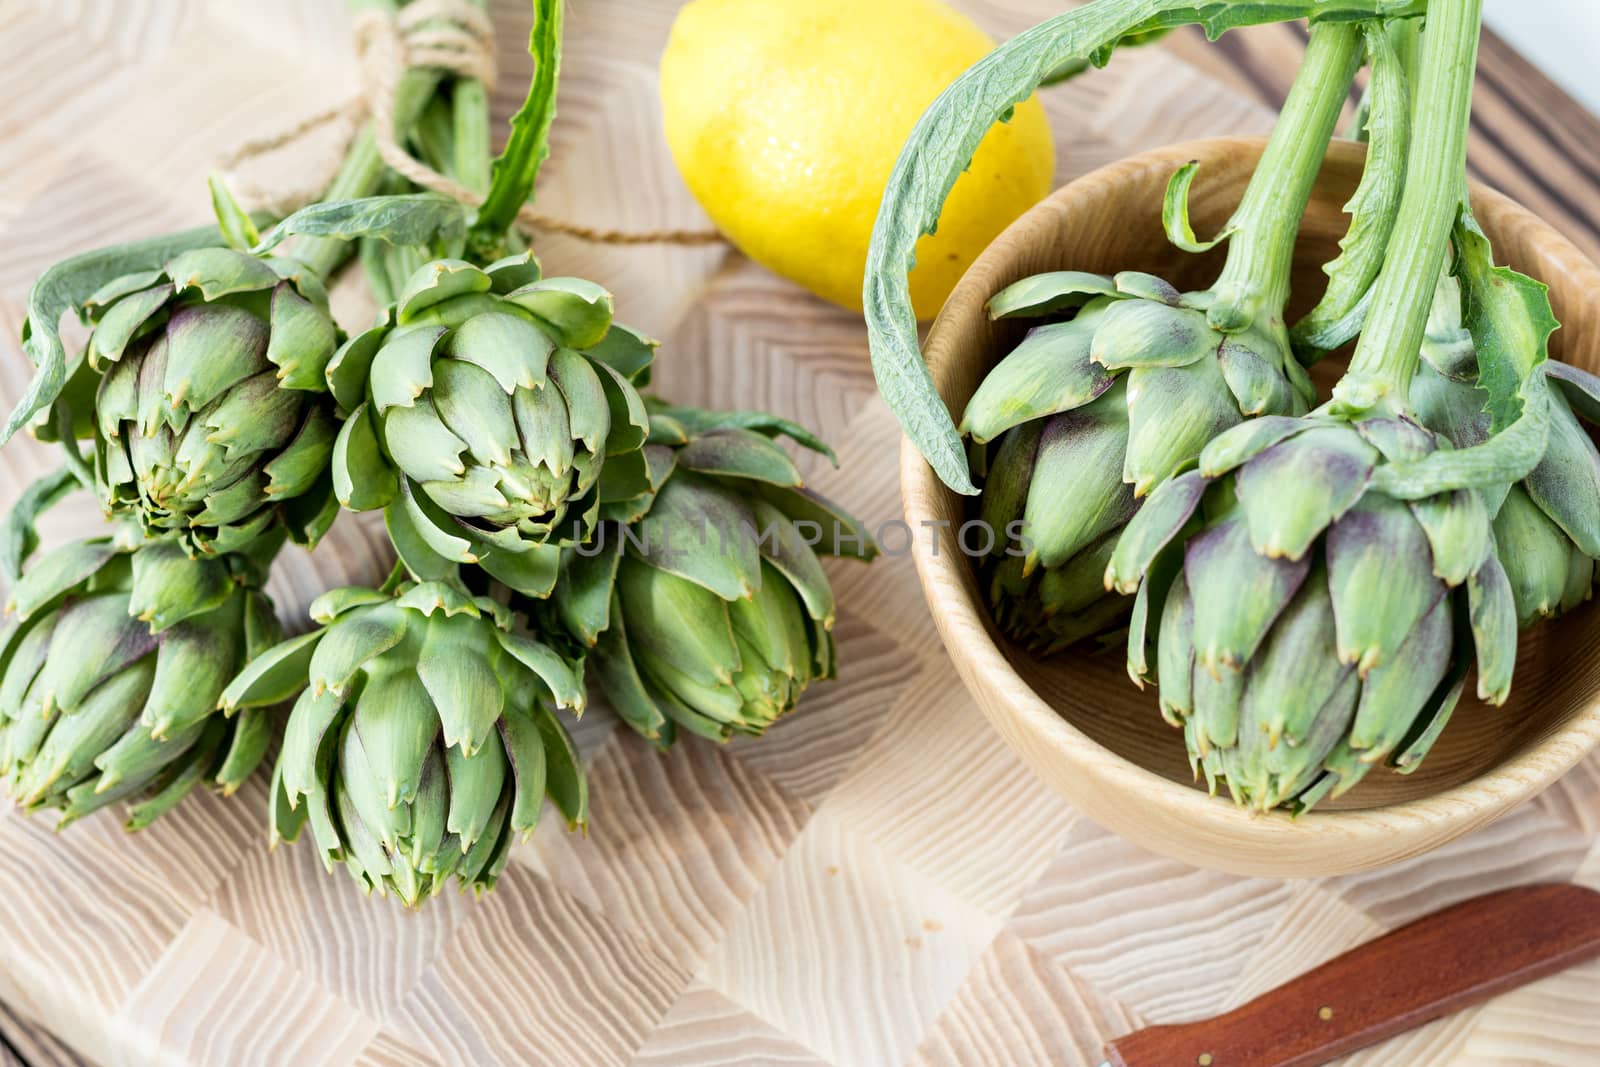 Two artichoke bouquets on kitchen table among some kitchen items. Top view